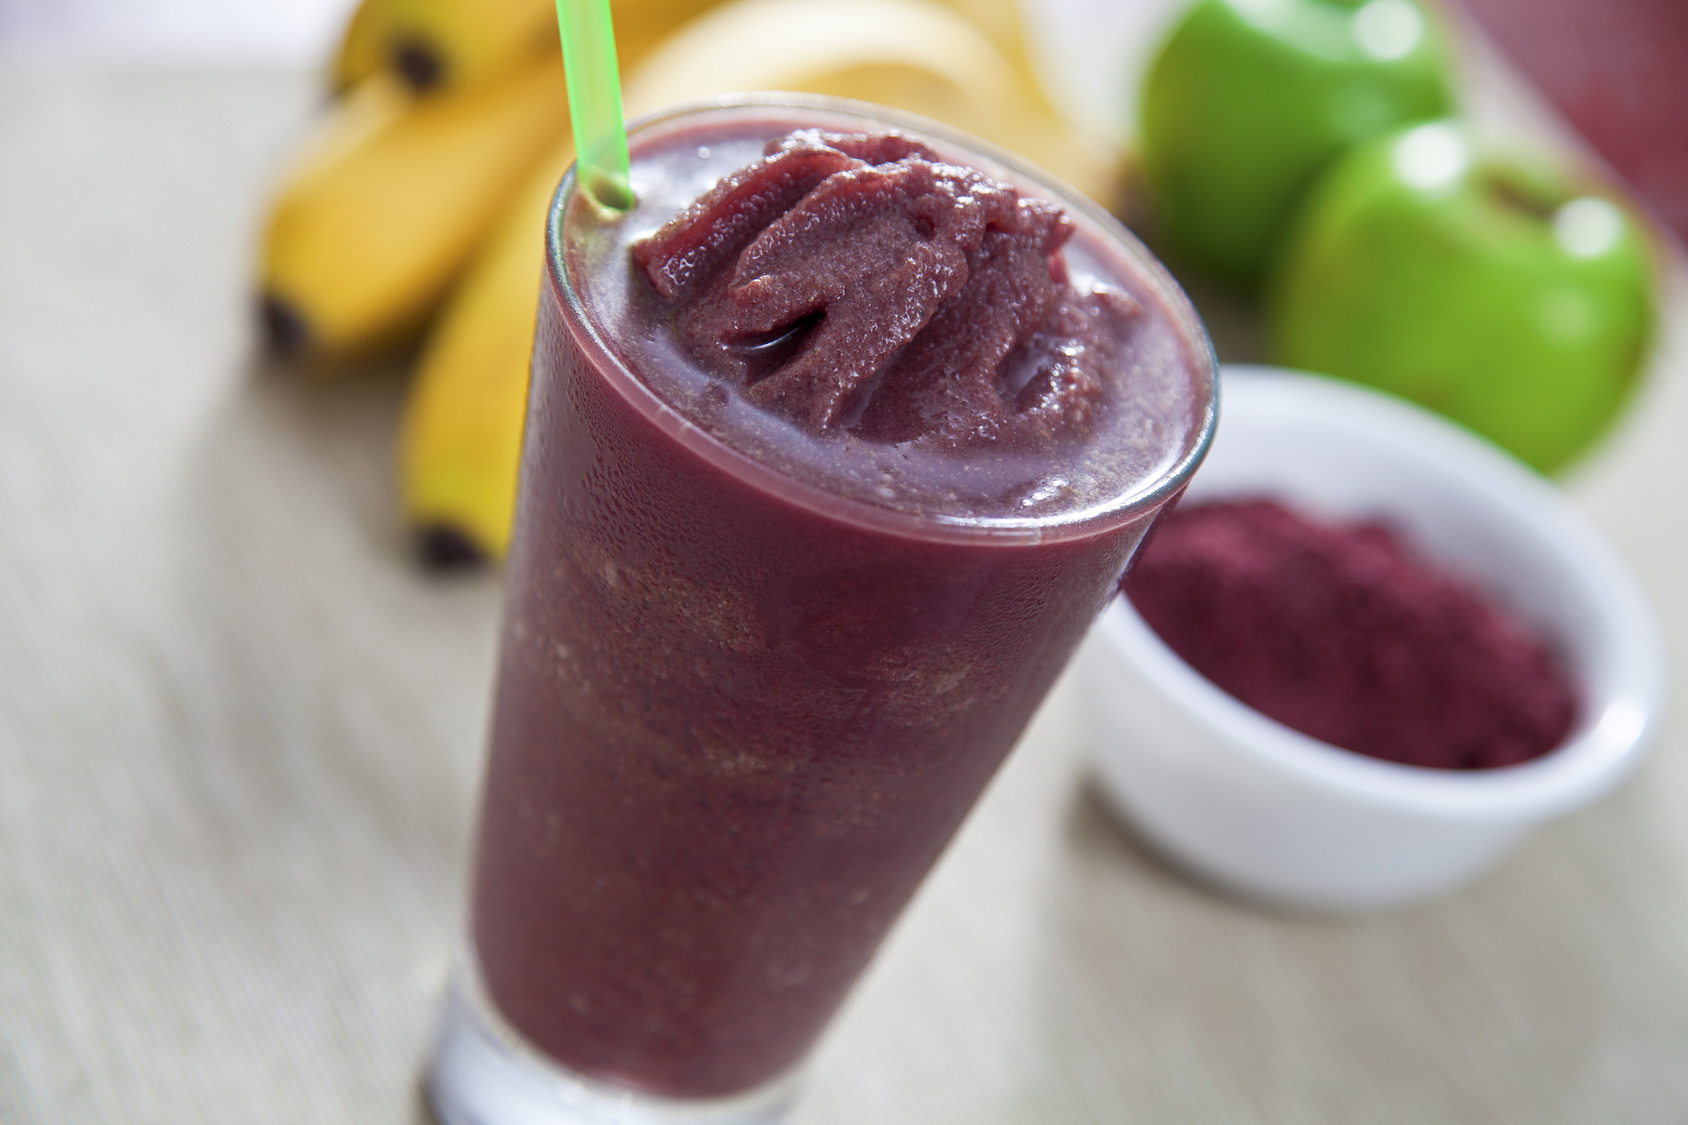 Acai berry smoothie higg in antioxidants